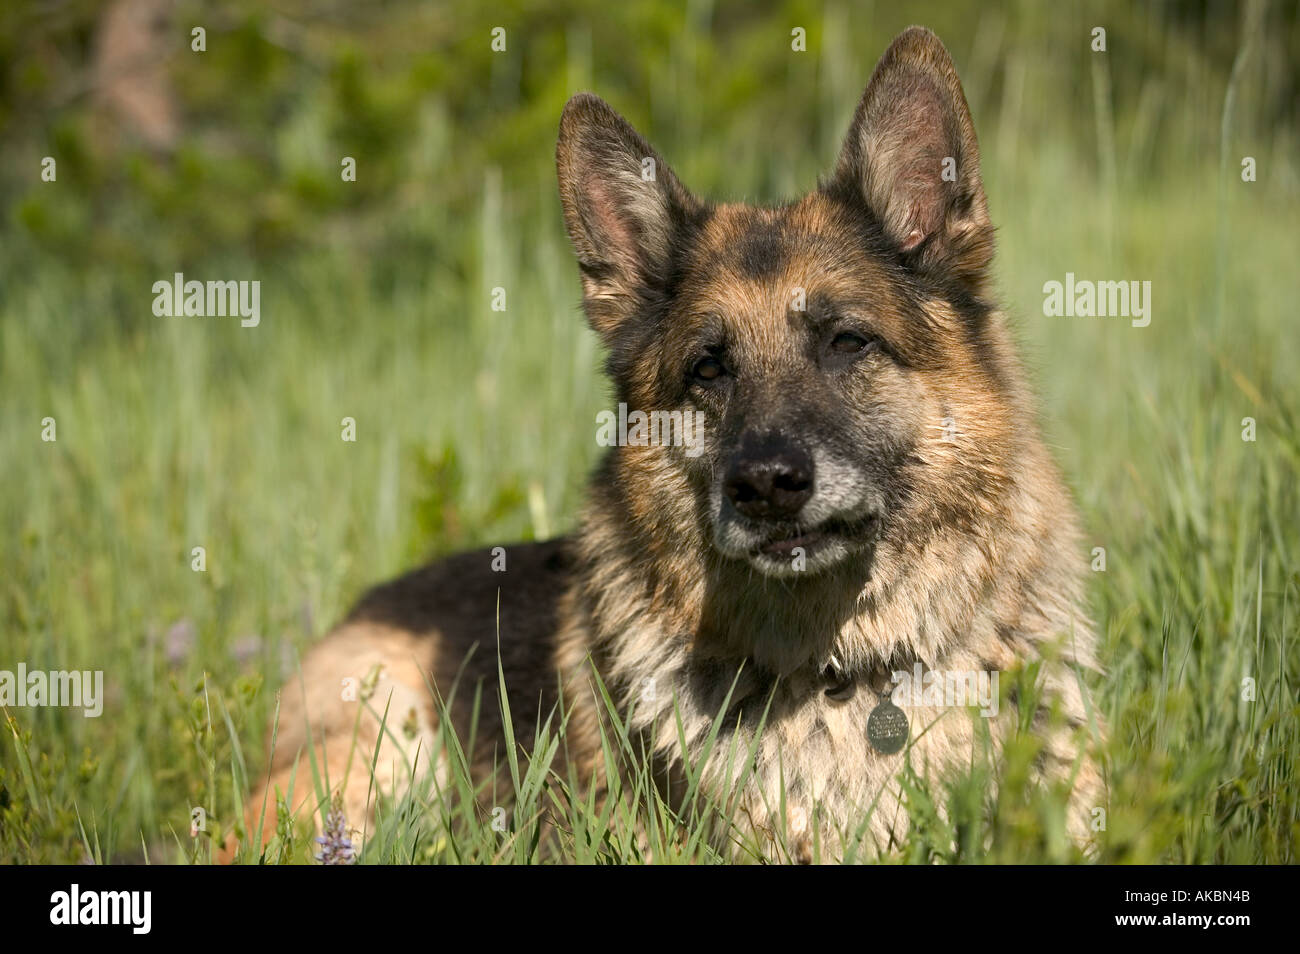 German Shepard Dog resting in grass Banque D'Images